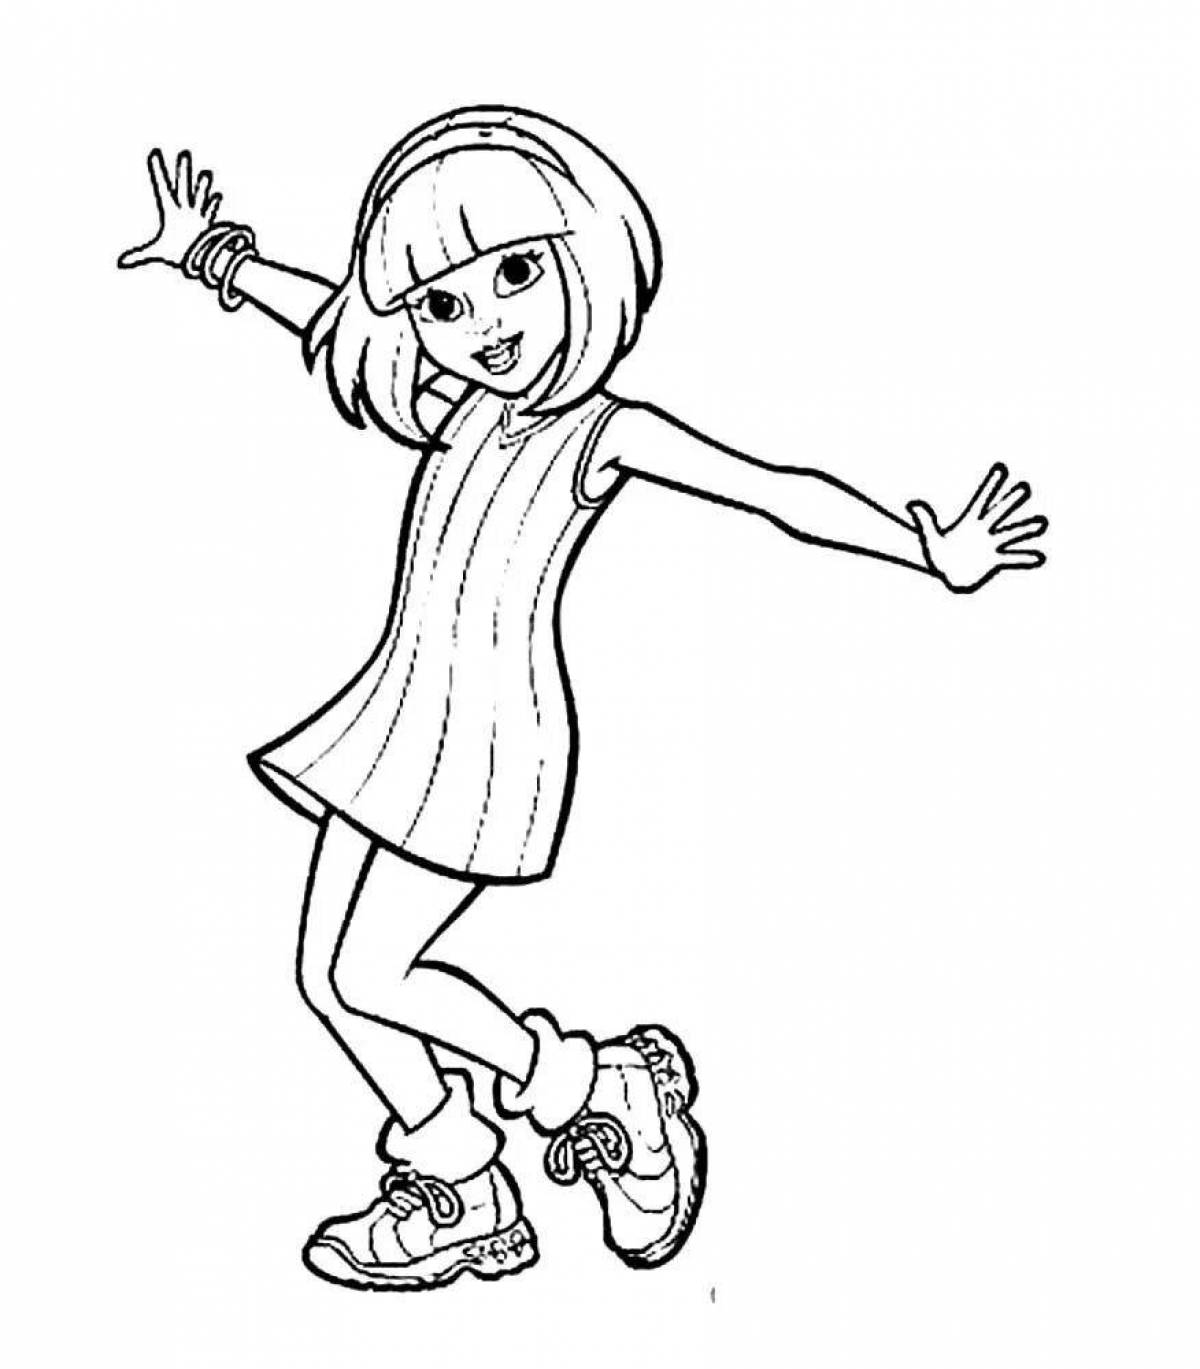 Coloring page merry dance